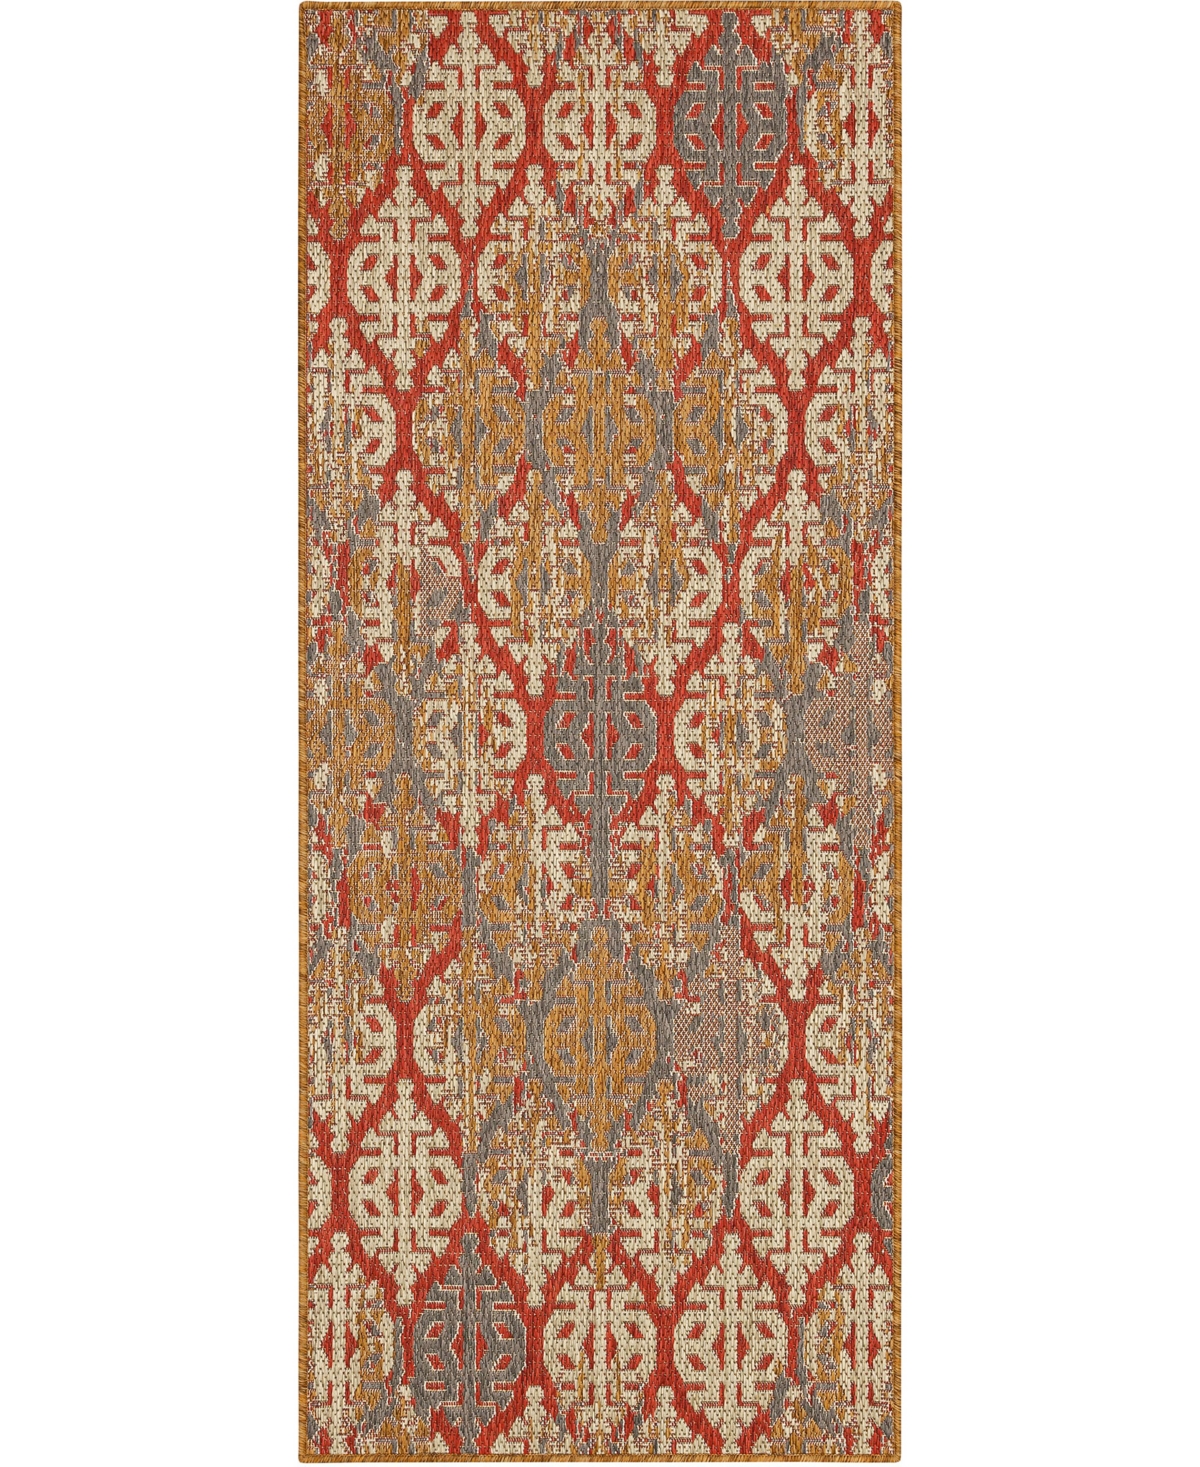 Mohawk Malibu Outdoor Stamped Ikat 2'5" X 6' Area Rug In Red